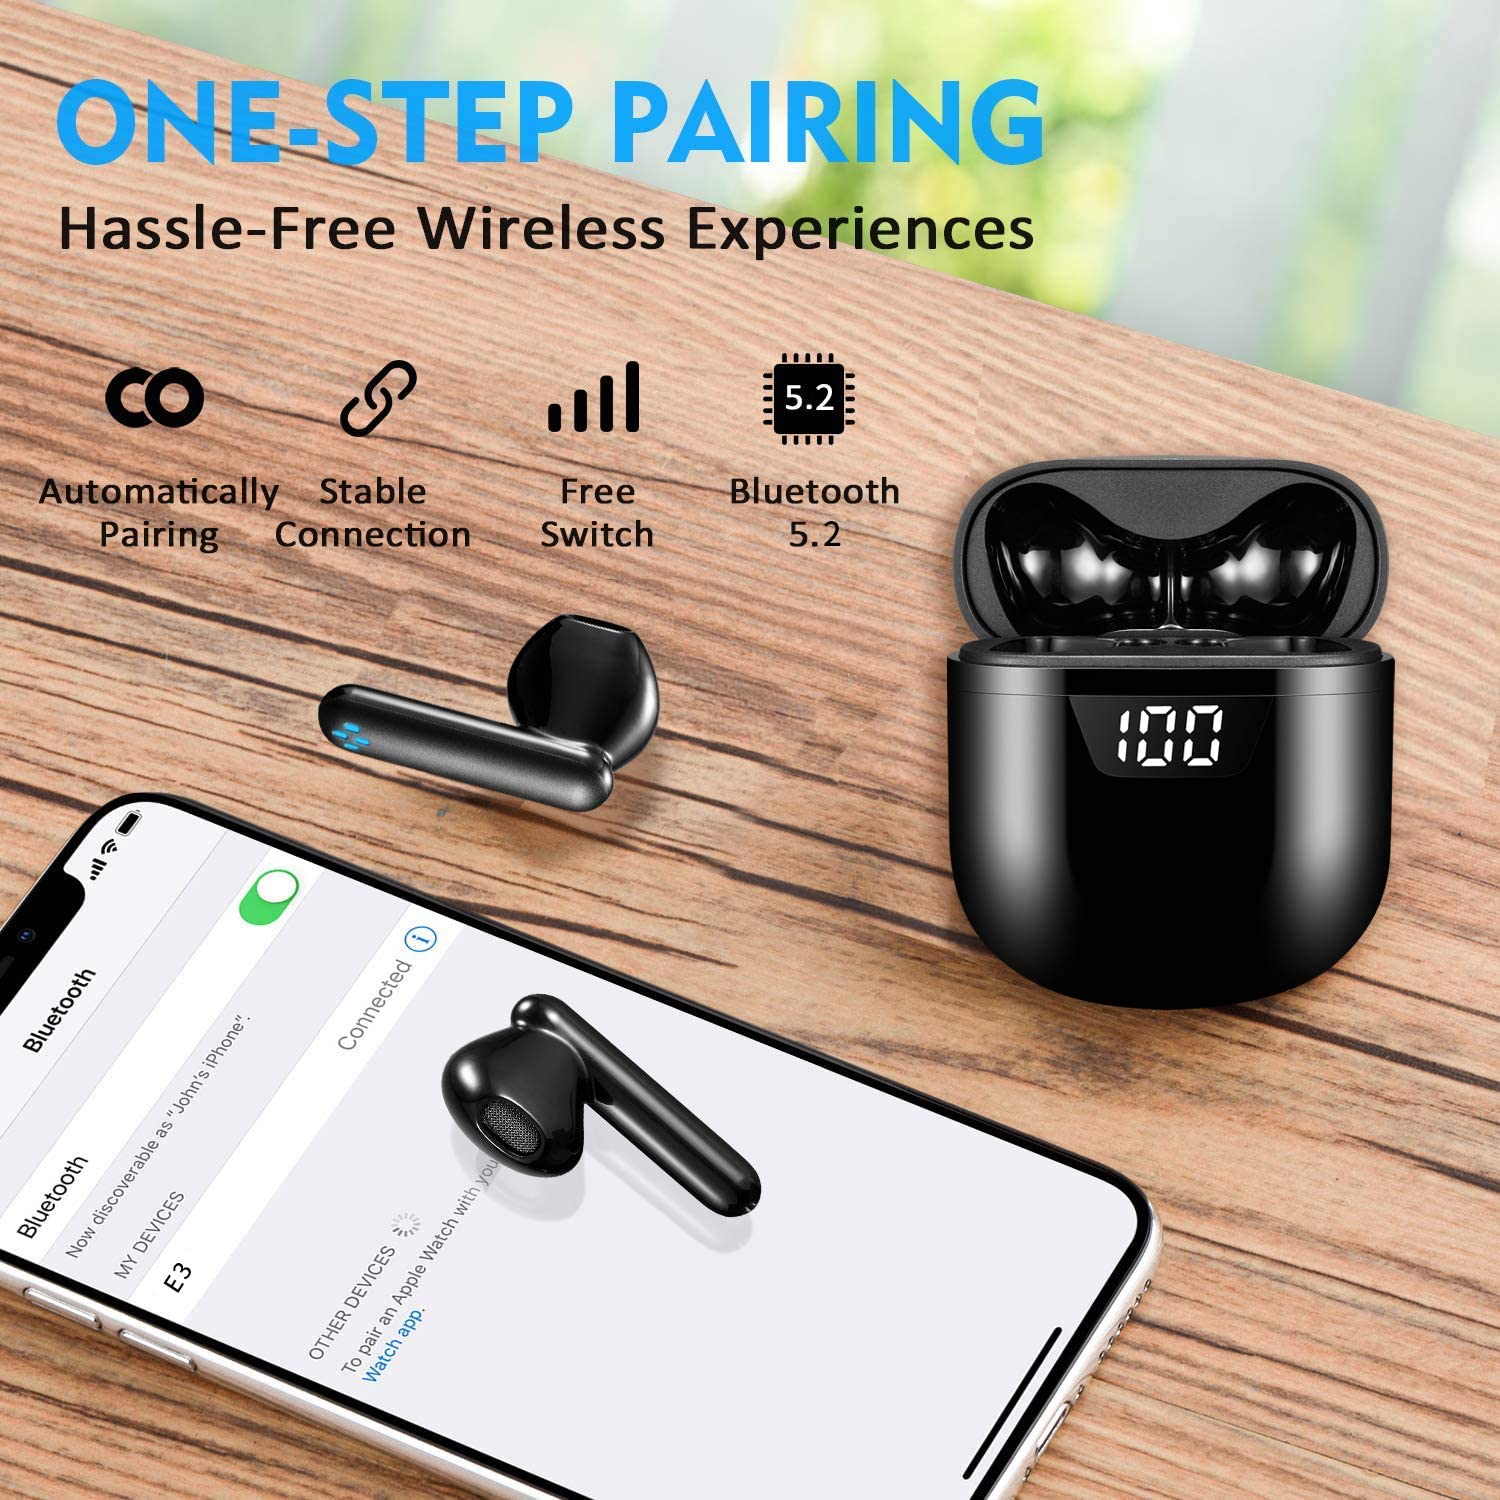 Bluetooth Headphones,Wireless Bluetooth 5.2 Earphones with Noise Reduction,Sport Earphones IPX7 Waterproof Pop-ups Auto Pairing Fast Charging for Apple/AirPods Pro/Android/iPhone(Black) - image 6 of 8